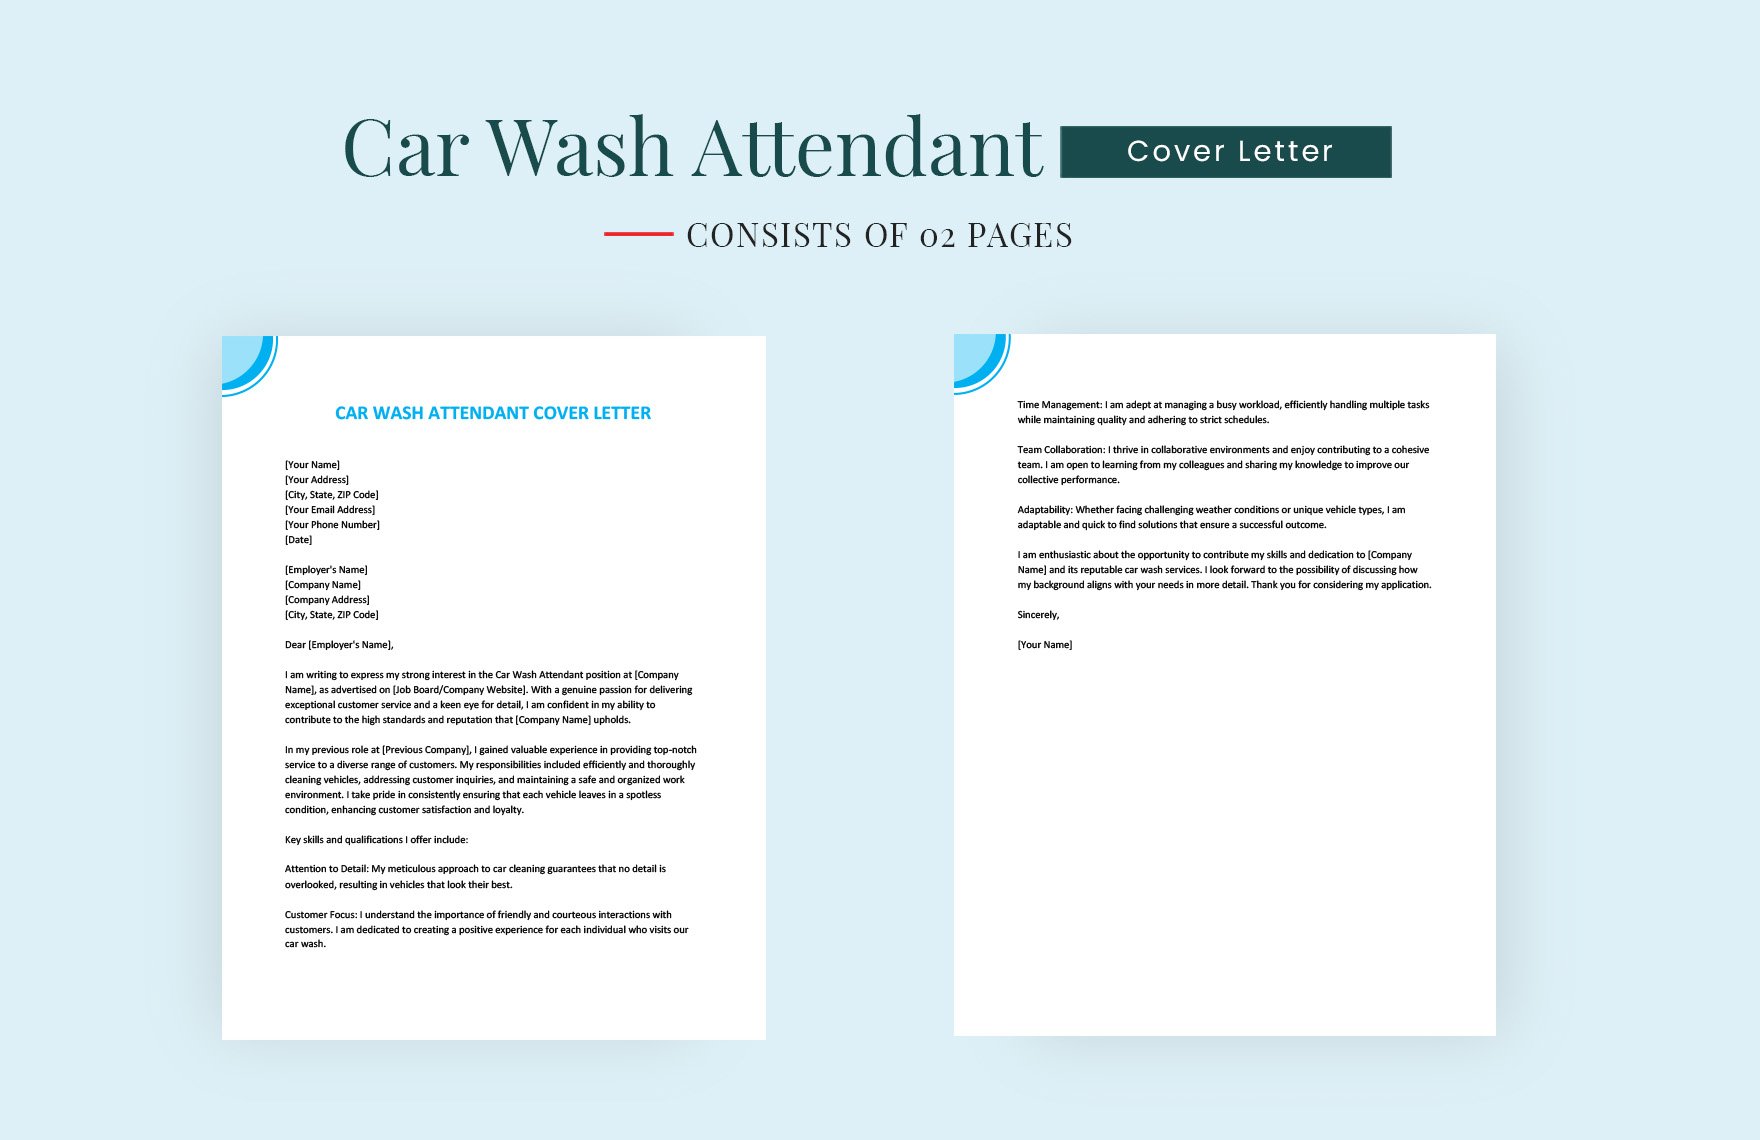 Car Wash Attendant Cover Letter in Word, Google Docs